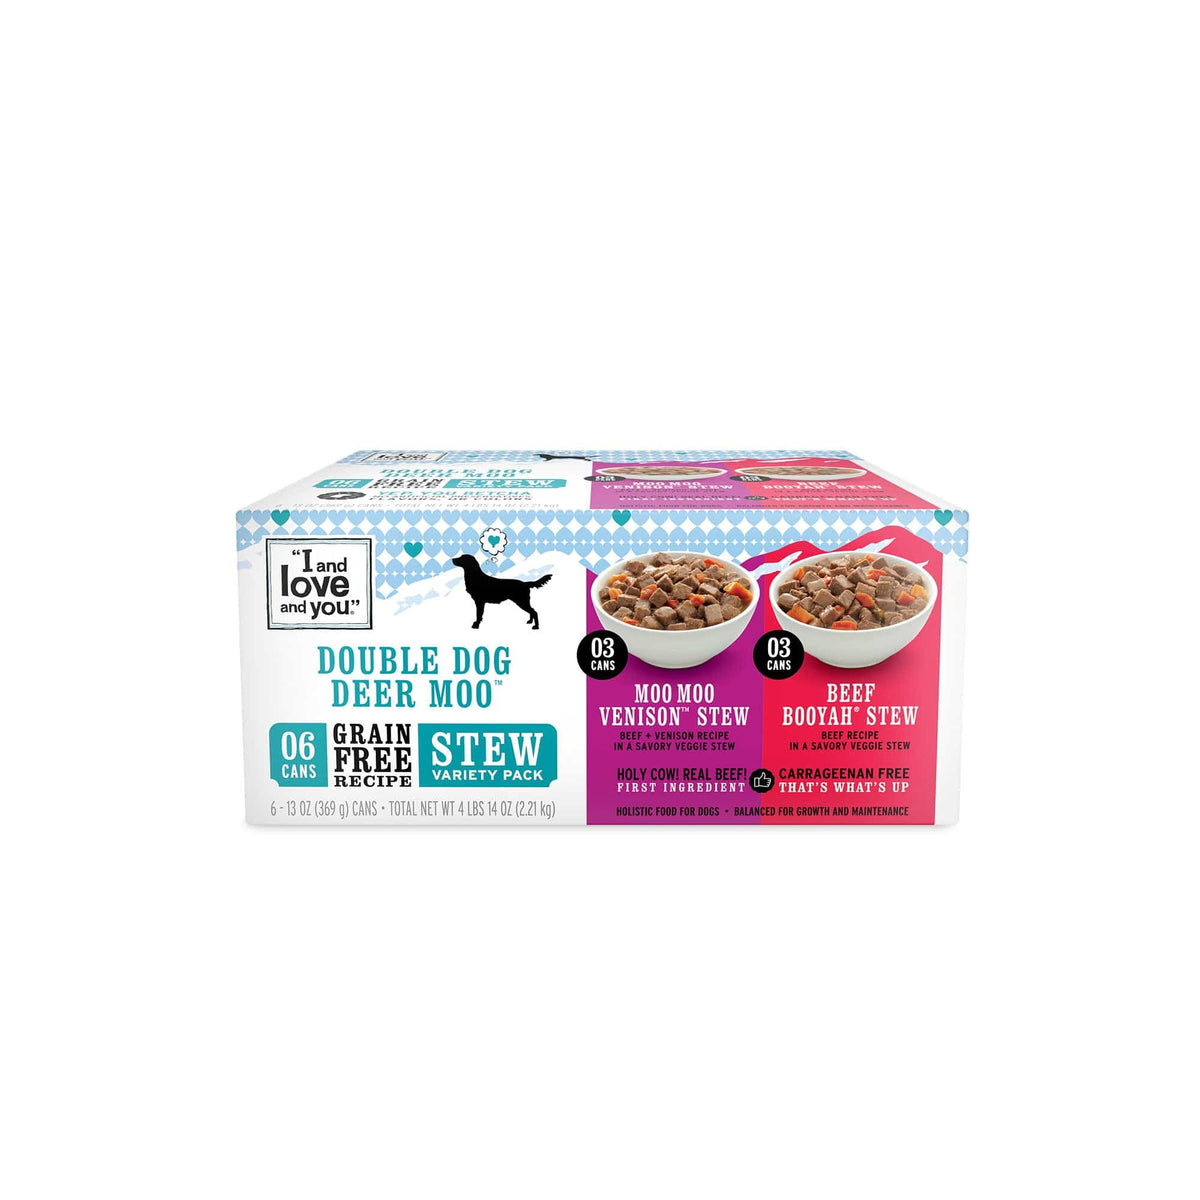 A variety pack of canned wet dog food with Moo Moo Venison and Beef Booyah flavors, showcasing a box of dog food, a silhouette of a dog, and bowls of food.